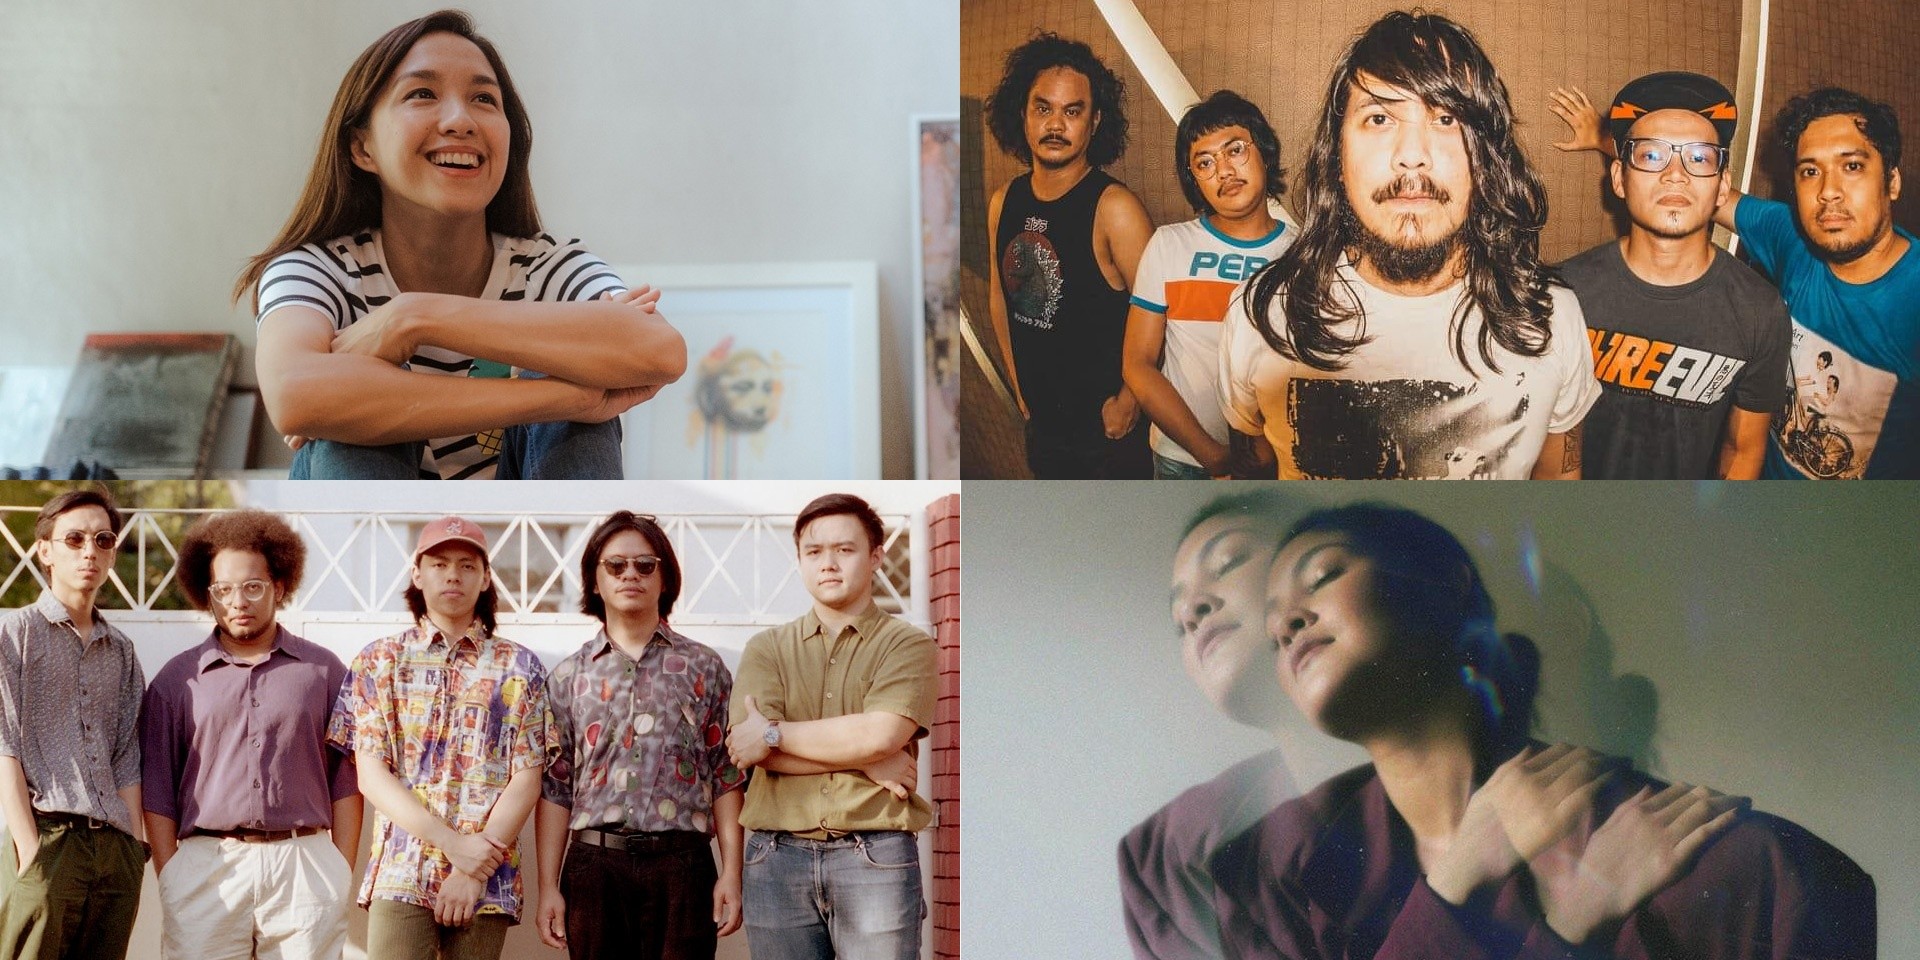 Barbie Almalbis, Kiana Valenciano, Flu, RIOT, and more cap off January with new music – listen